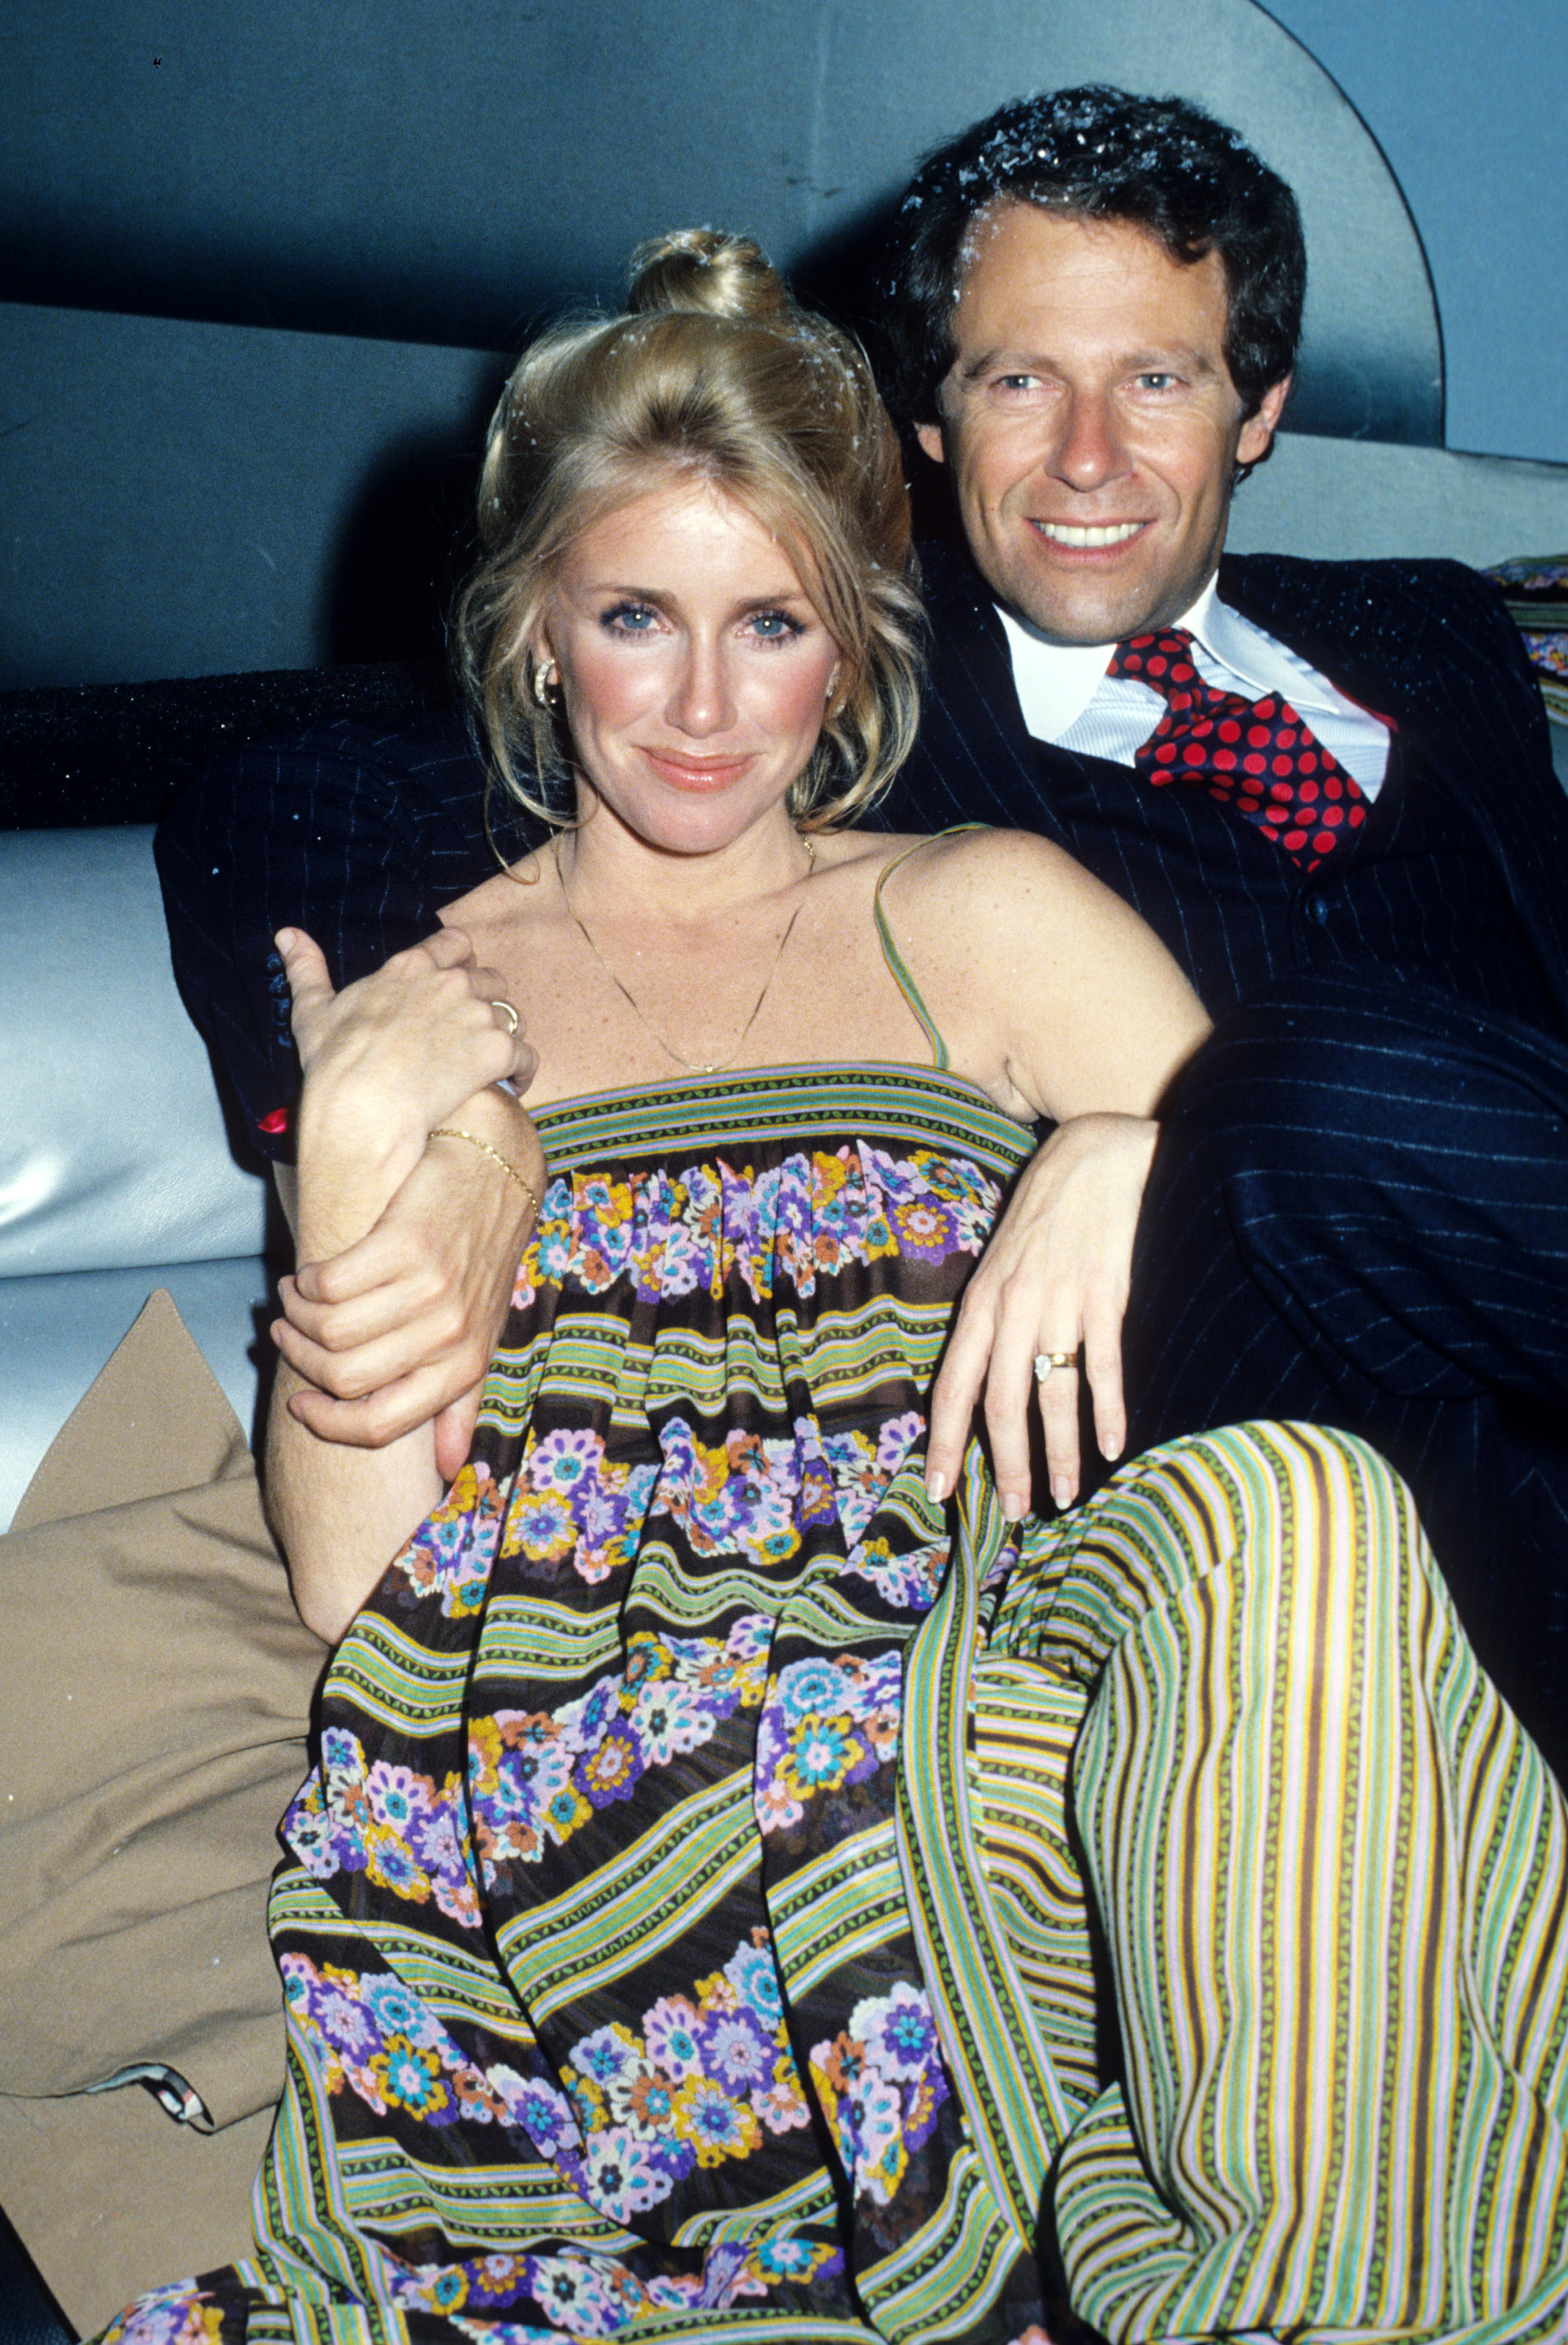 Suzanne Somers and Alan Hamel at Studio 54 in New York City on December 19, 1978 | Source: Getty Images